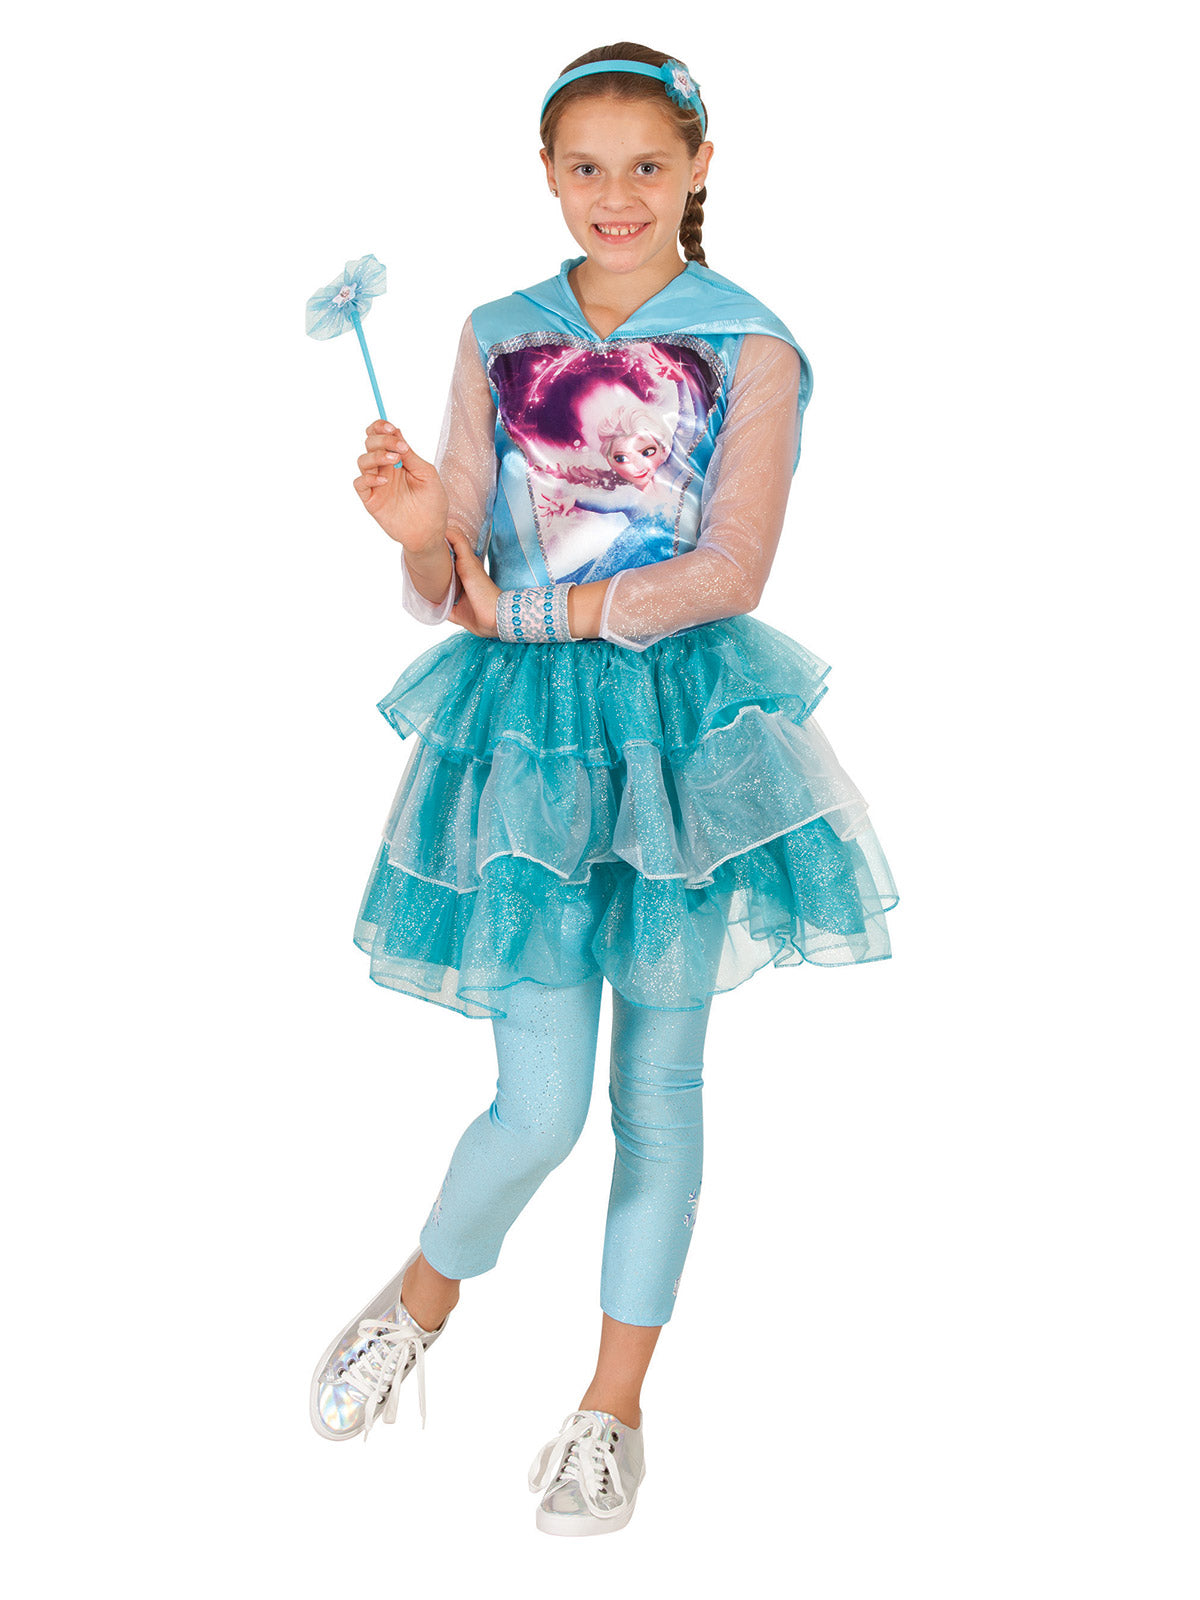 Frozen Elsa Footless Tights Child Girl's costume accessory